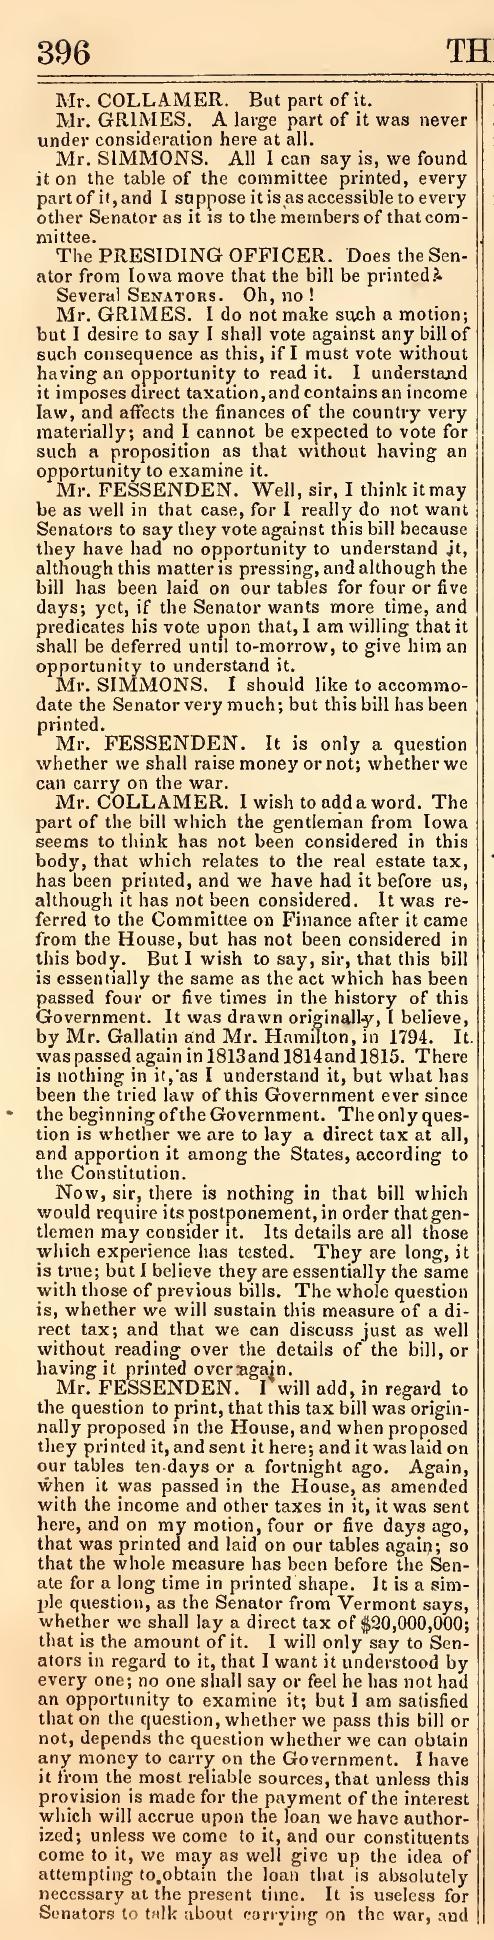 Senate debate over the Revenue Act of 1861 which imposed the first federal income tax, Maryland  Congressional Globe August 2 1861